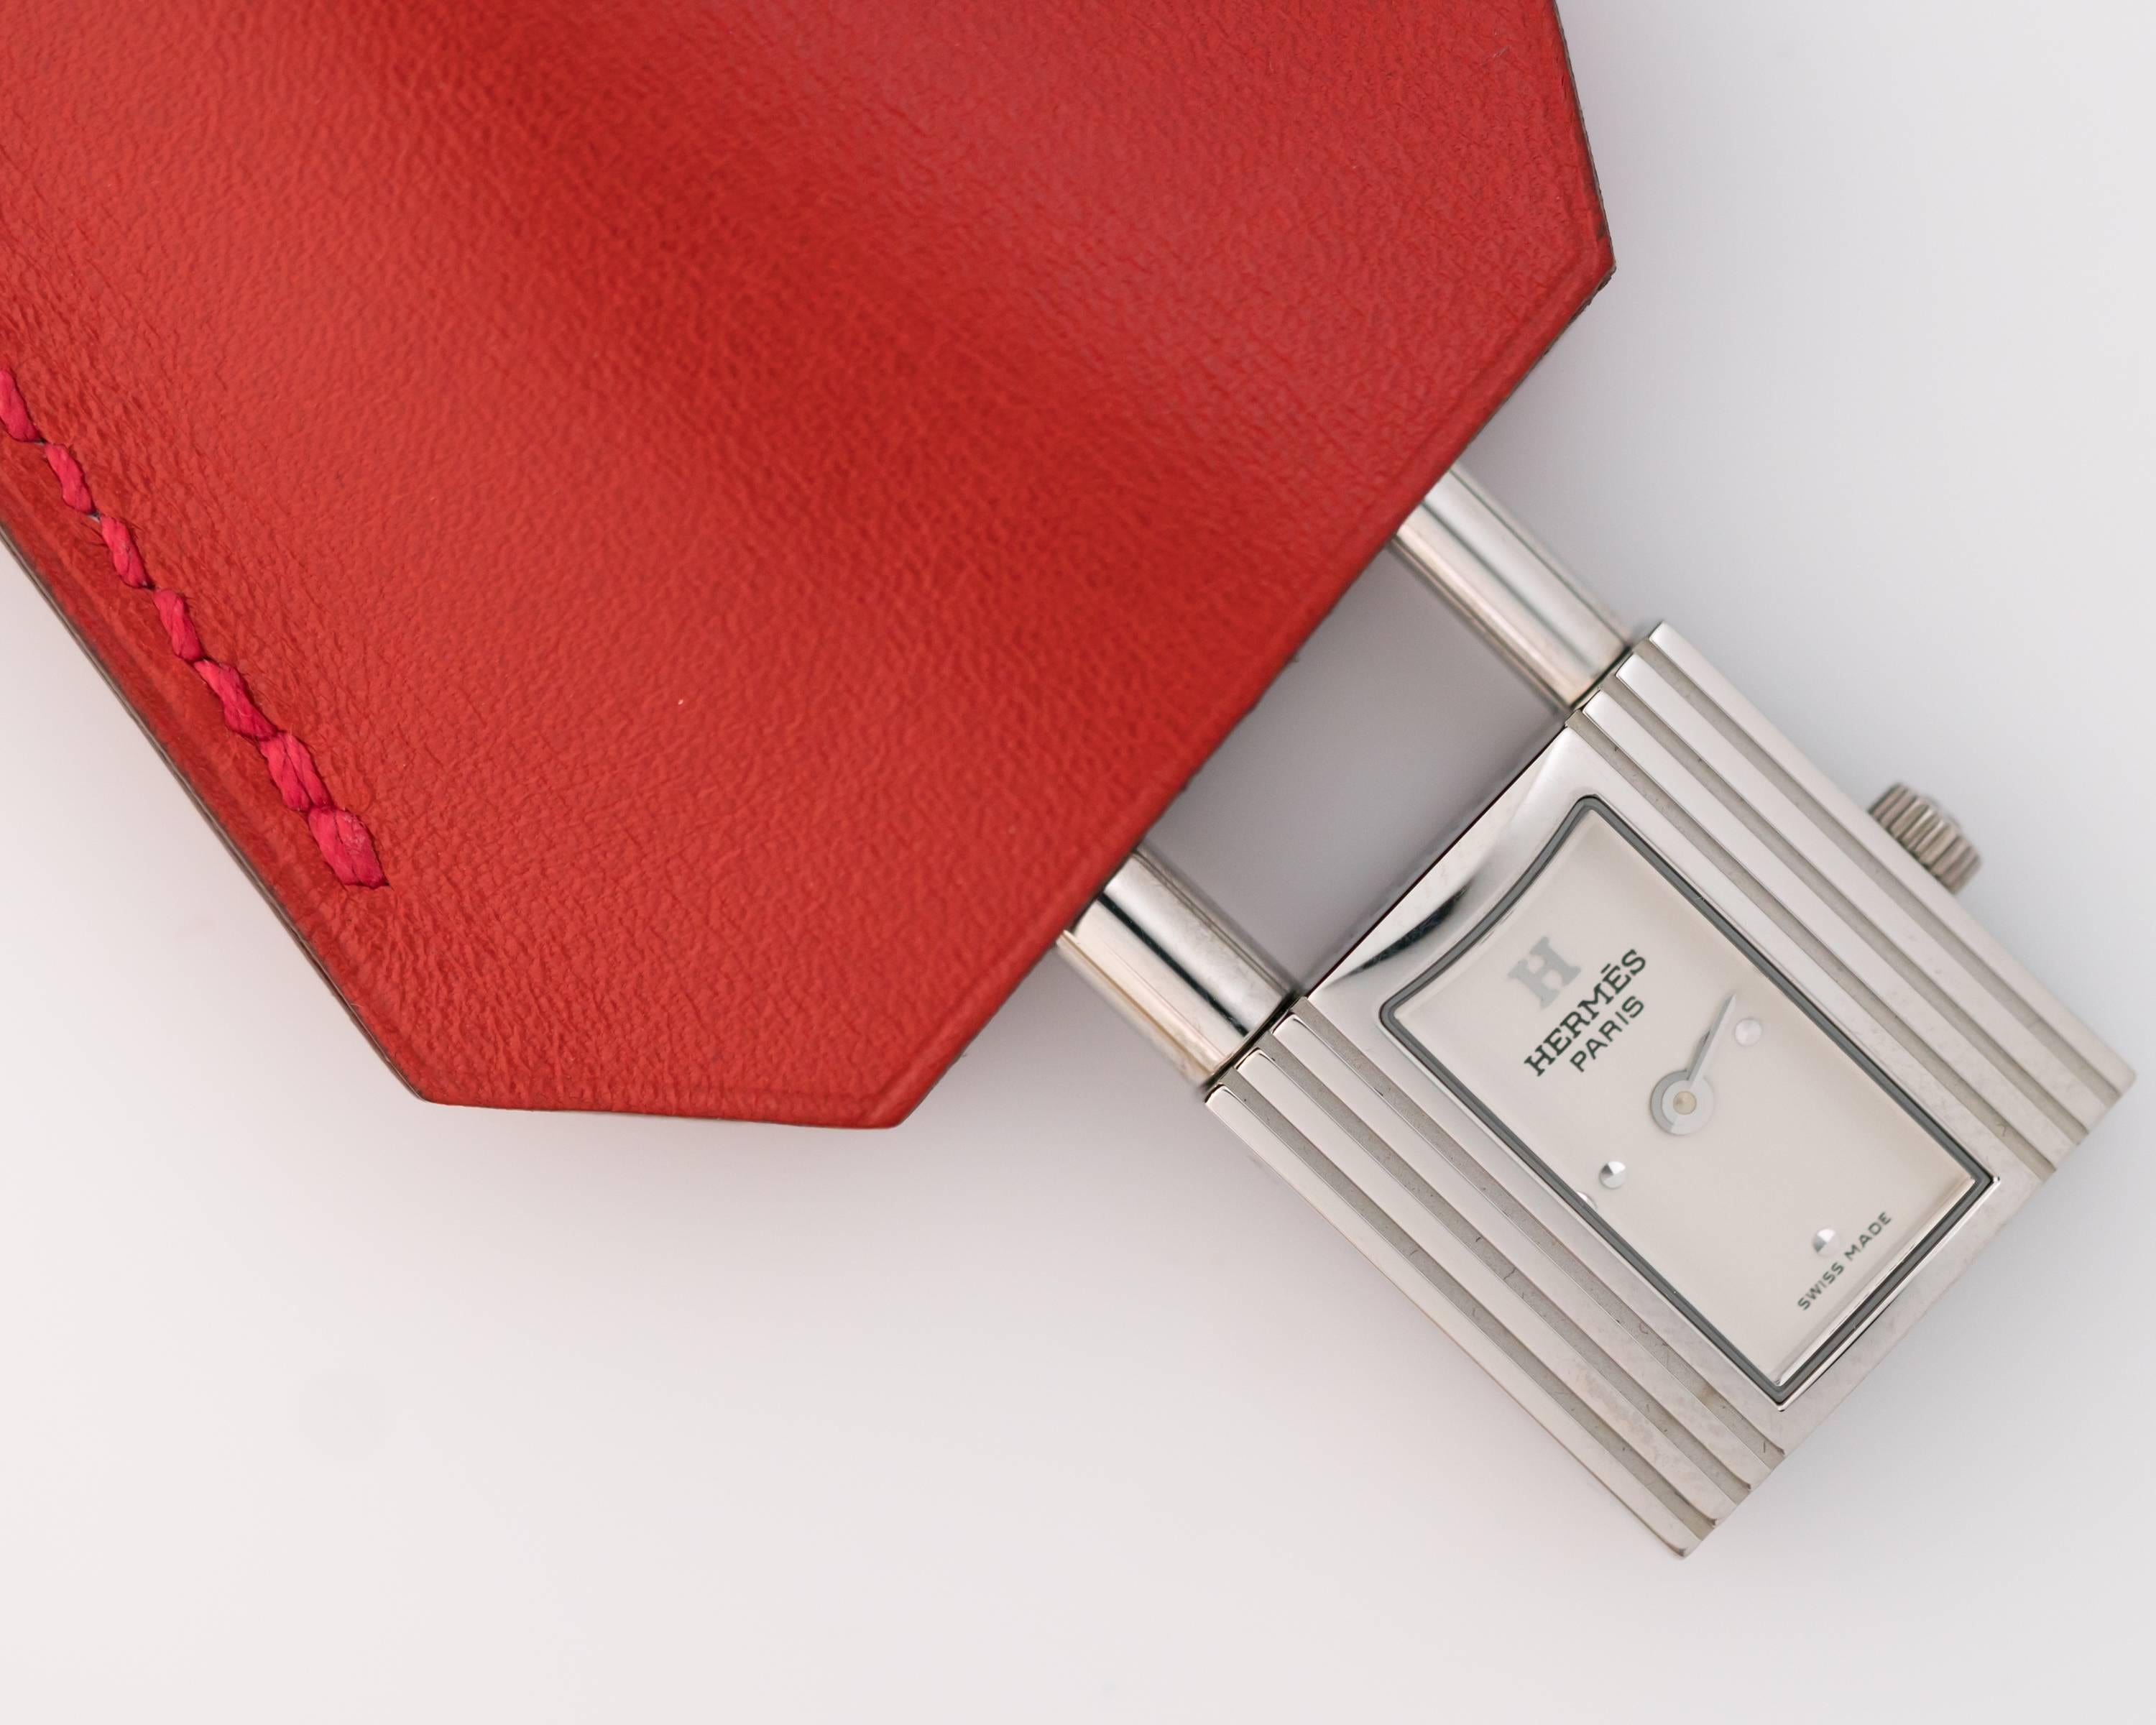 Hermes Paris Stainless Steel Kelly Watch, Iconic Designer! 
Brand New in the Original Box - this is the perfect accessory for your purse. This lock motif watch attaches to a red leather strap and retracts into the protective red leather cover. This